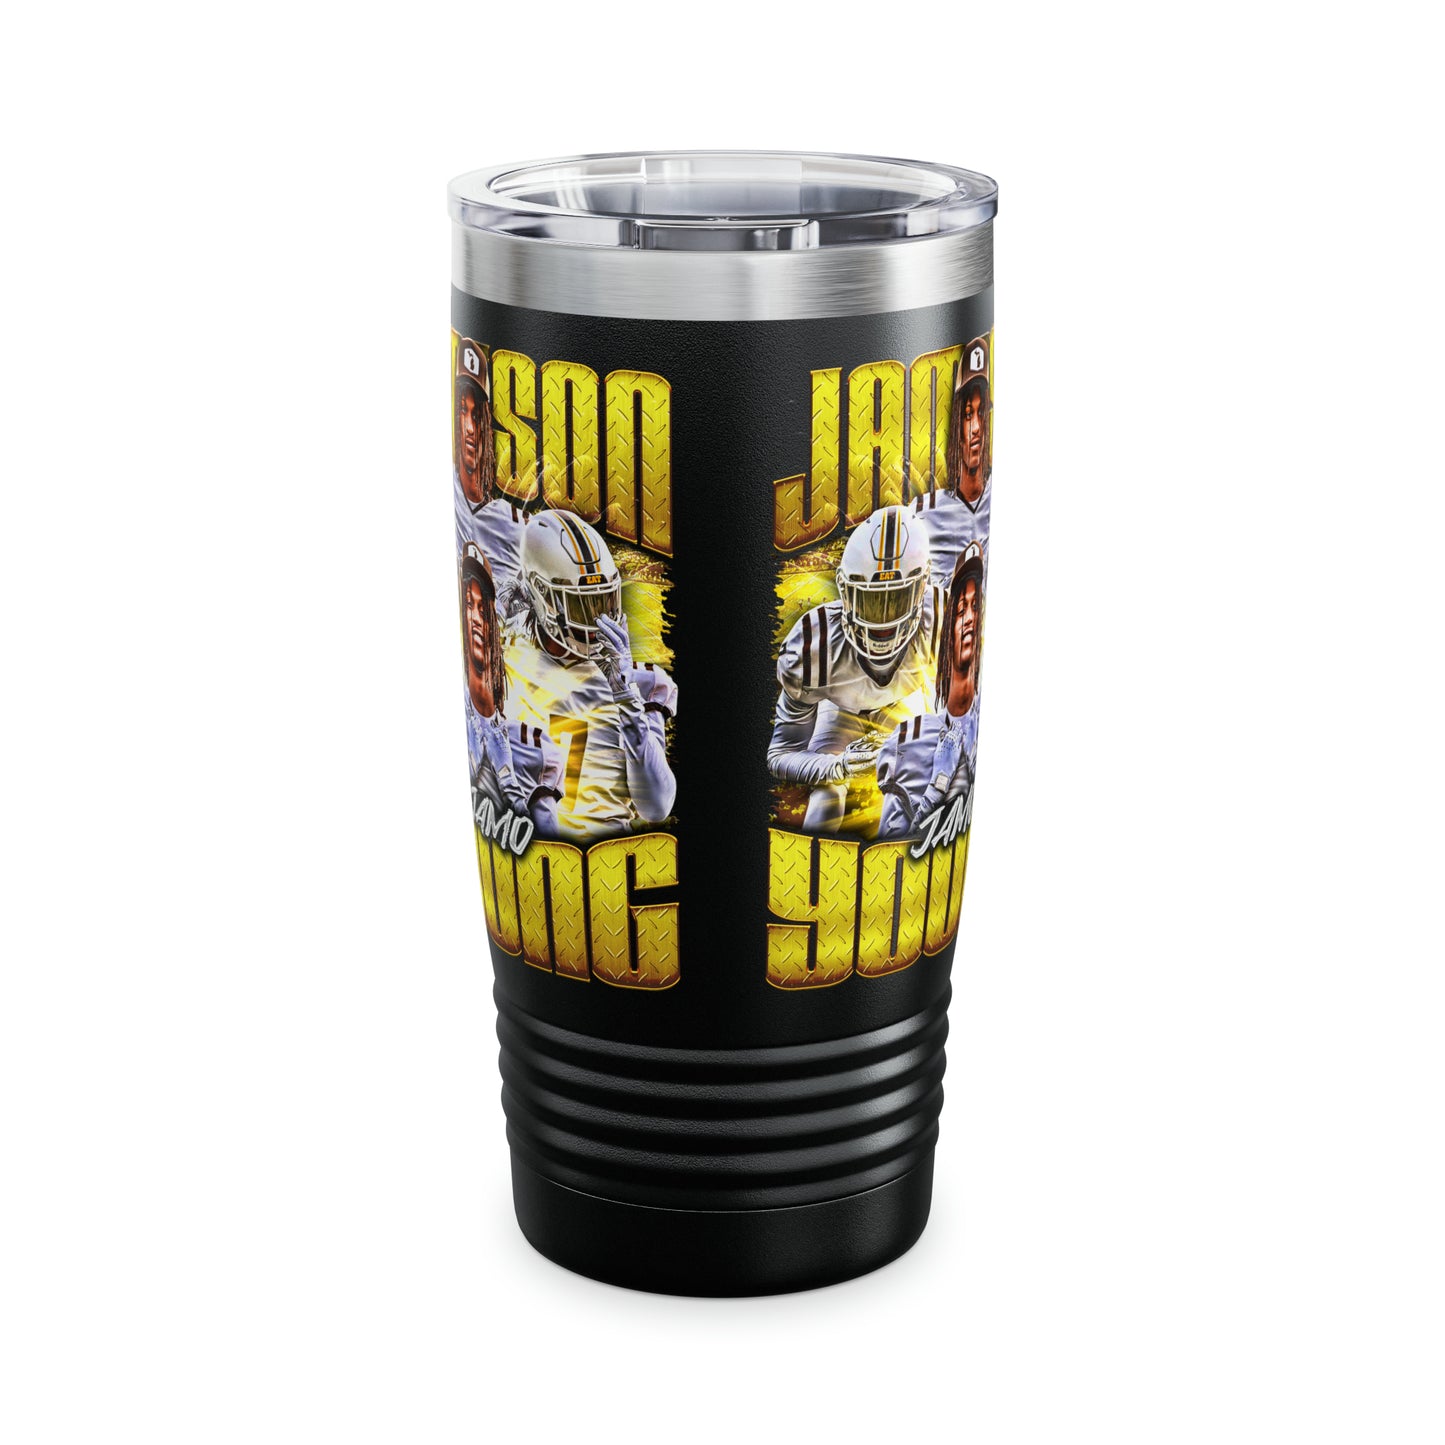 JAMESON YOUNG STAINLESS STEEL TUMBLER